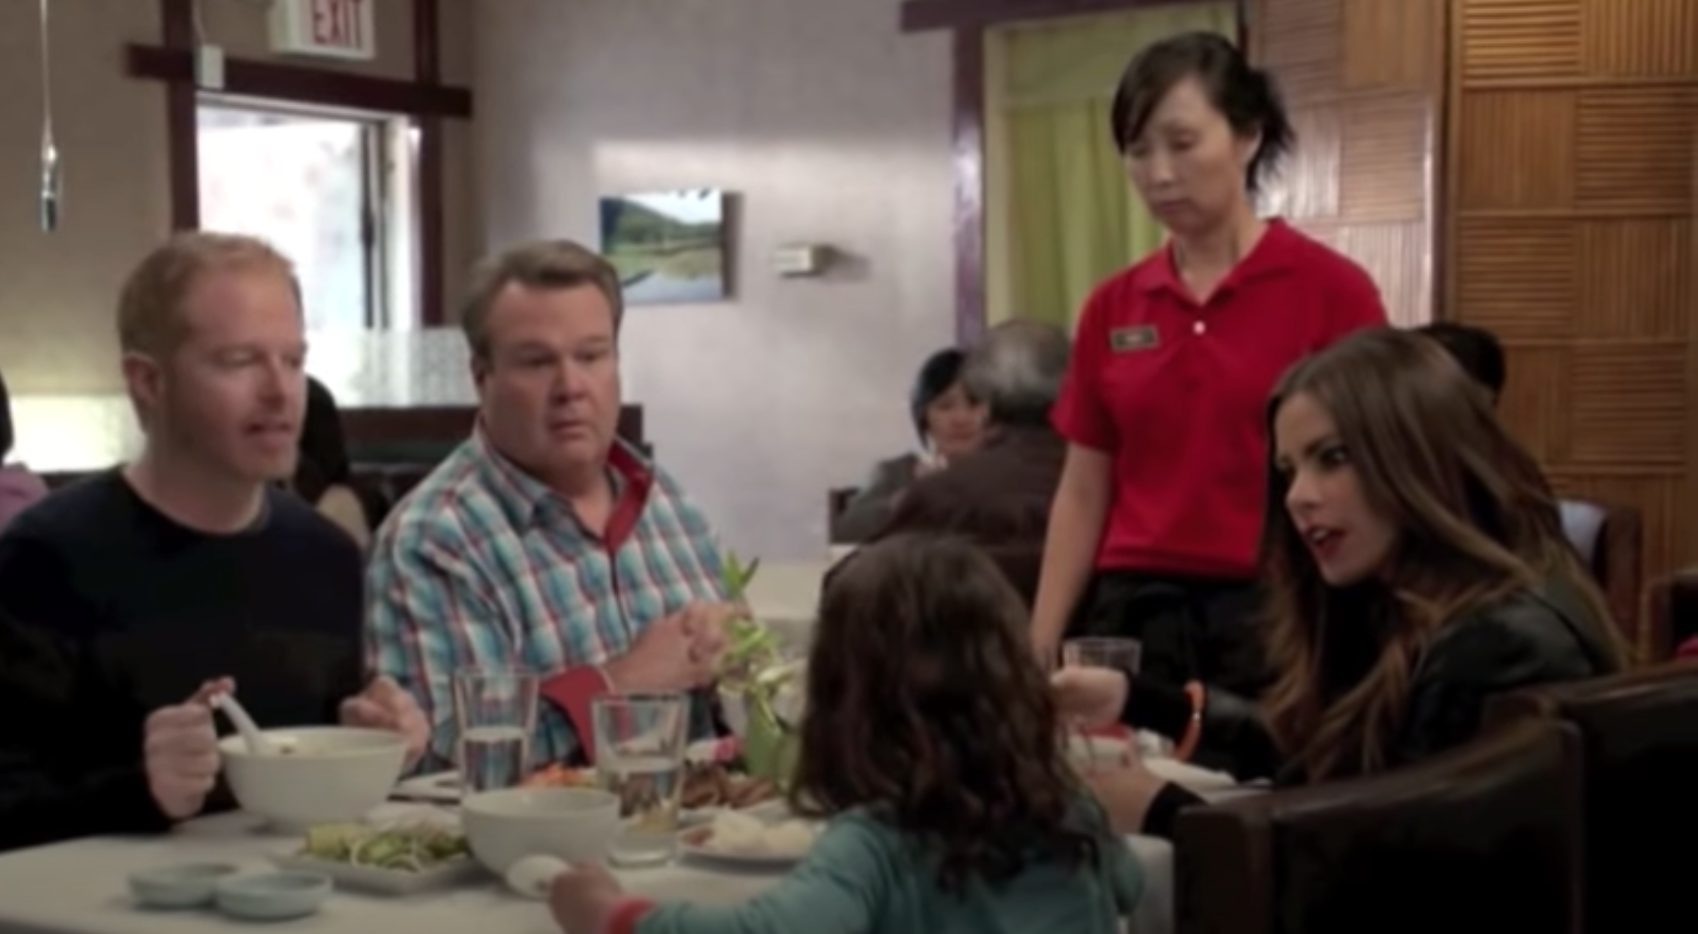 Lily yelling loudly in a restaurant while everyone looks shocked  in &quot;Modern Family&quot;